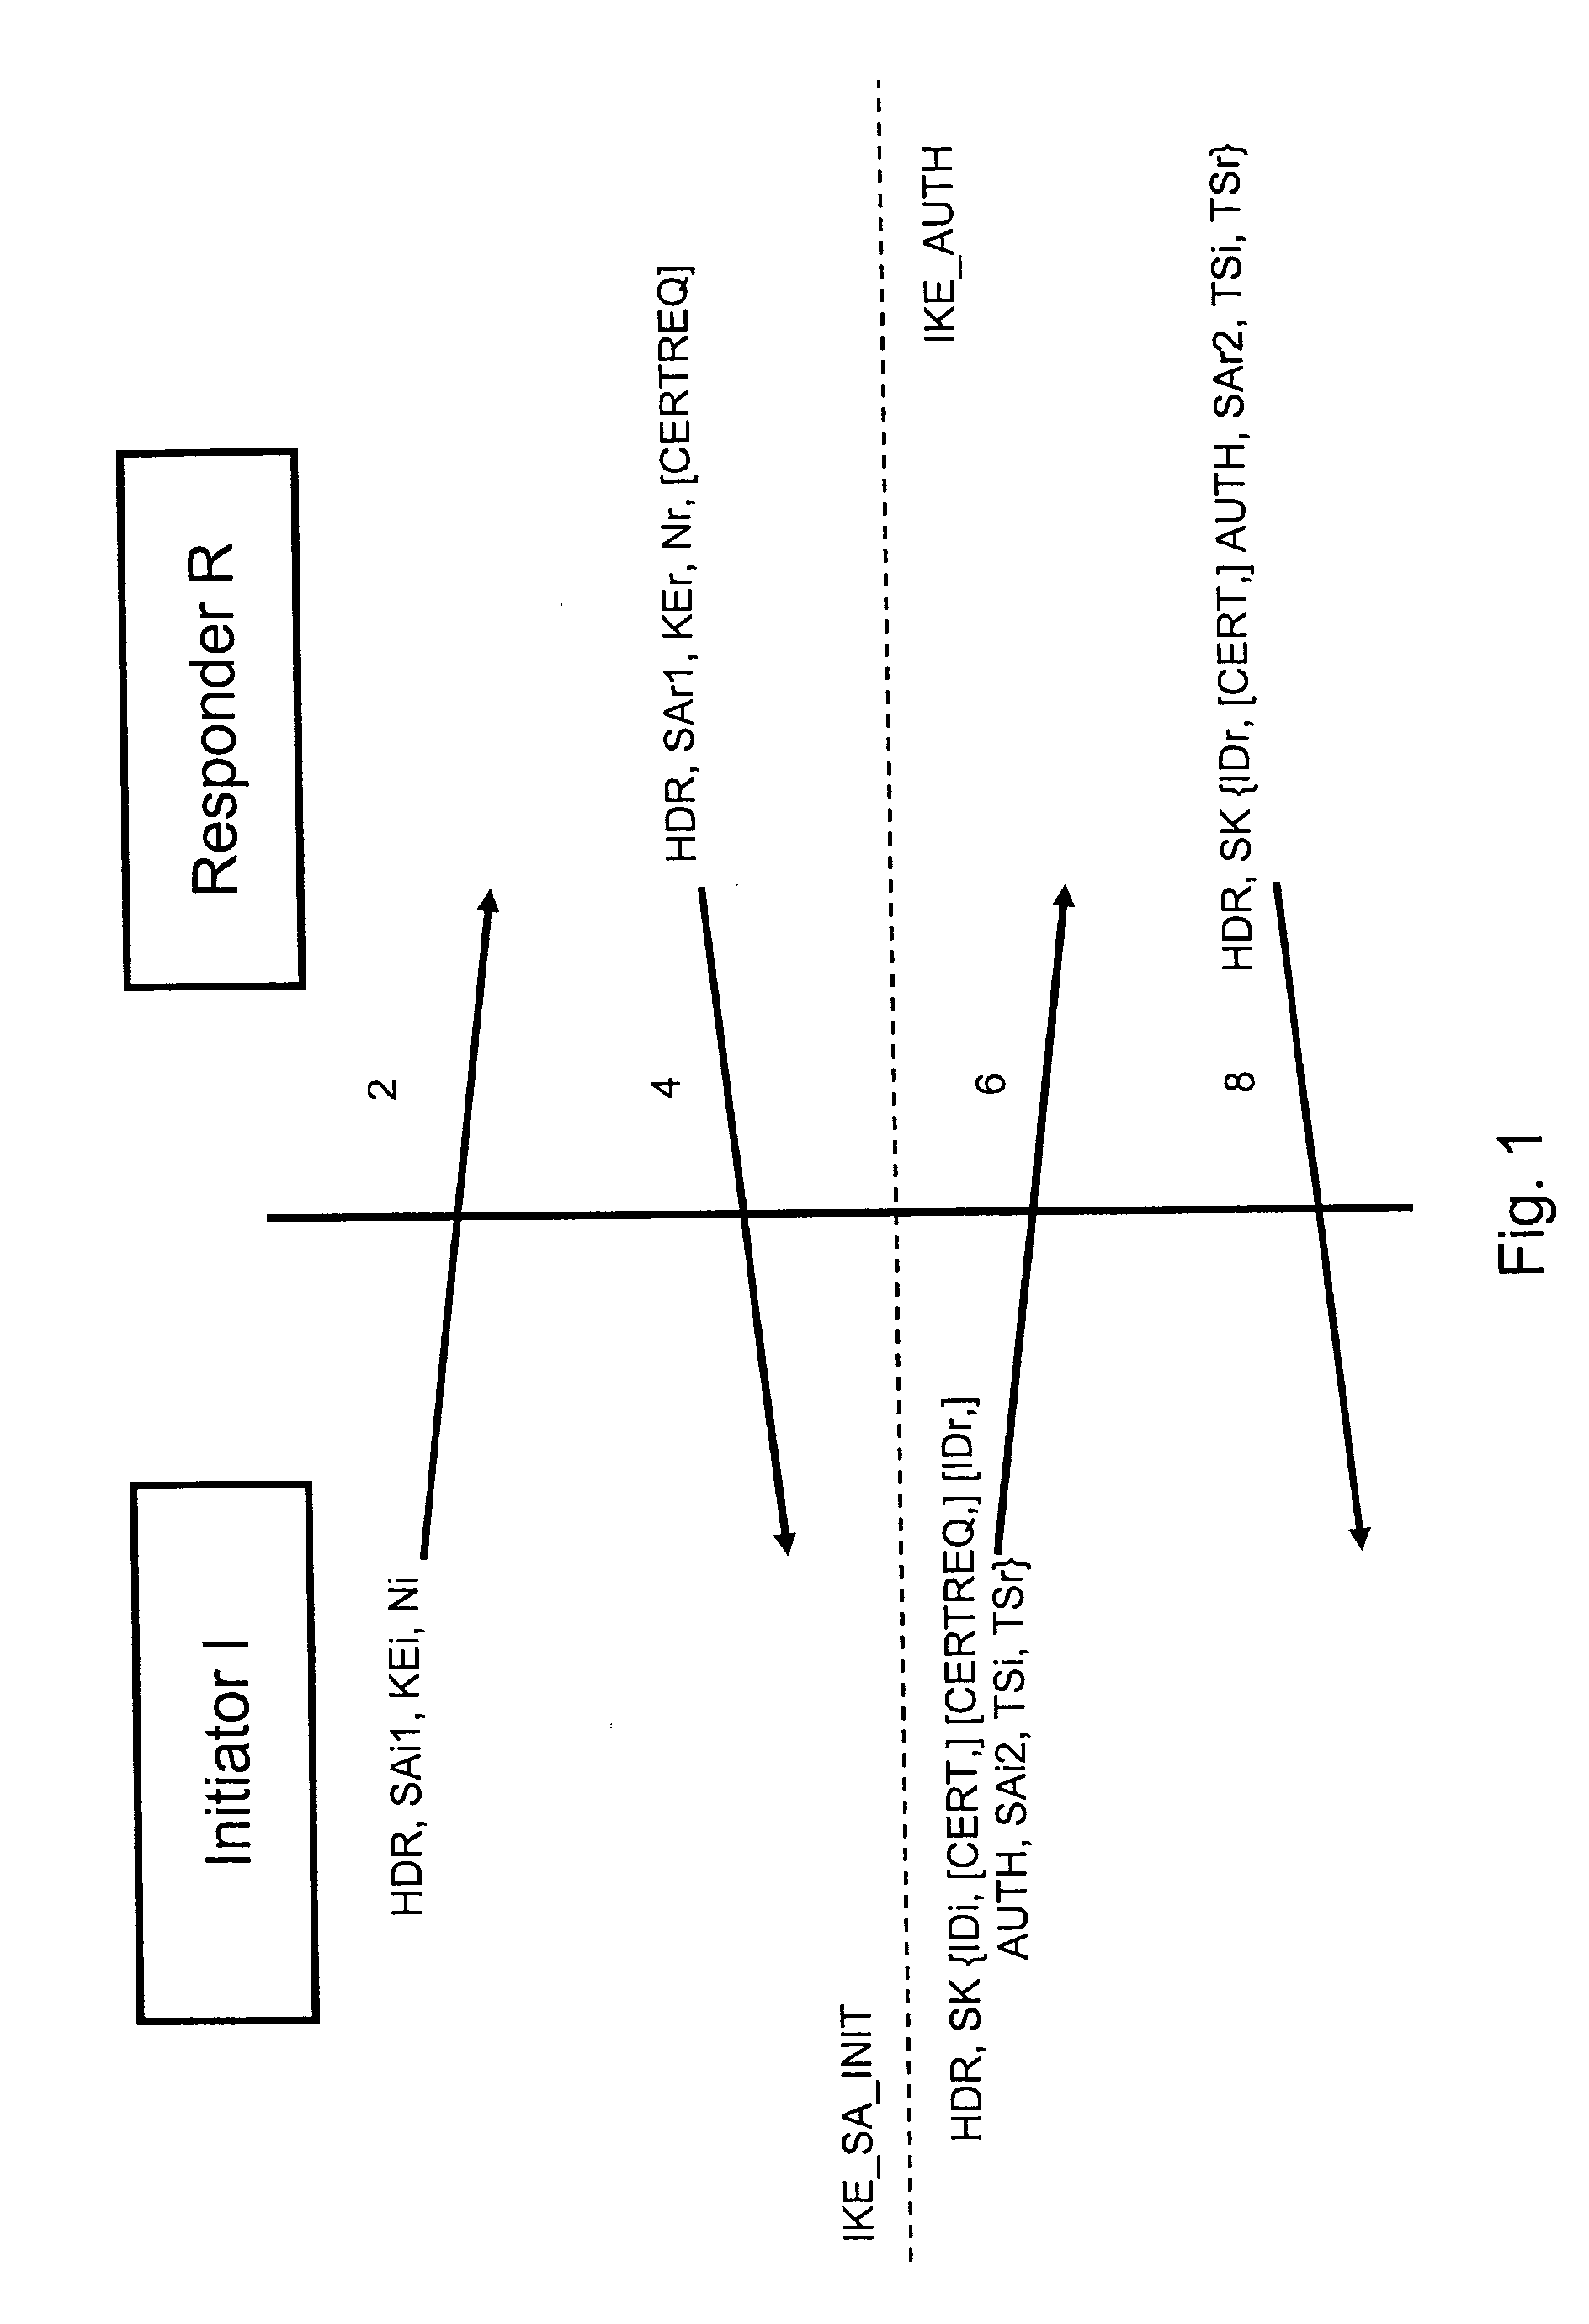 Method for securing a communication